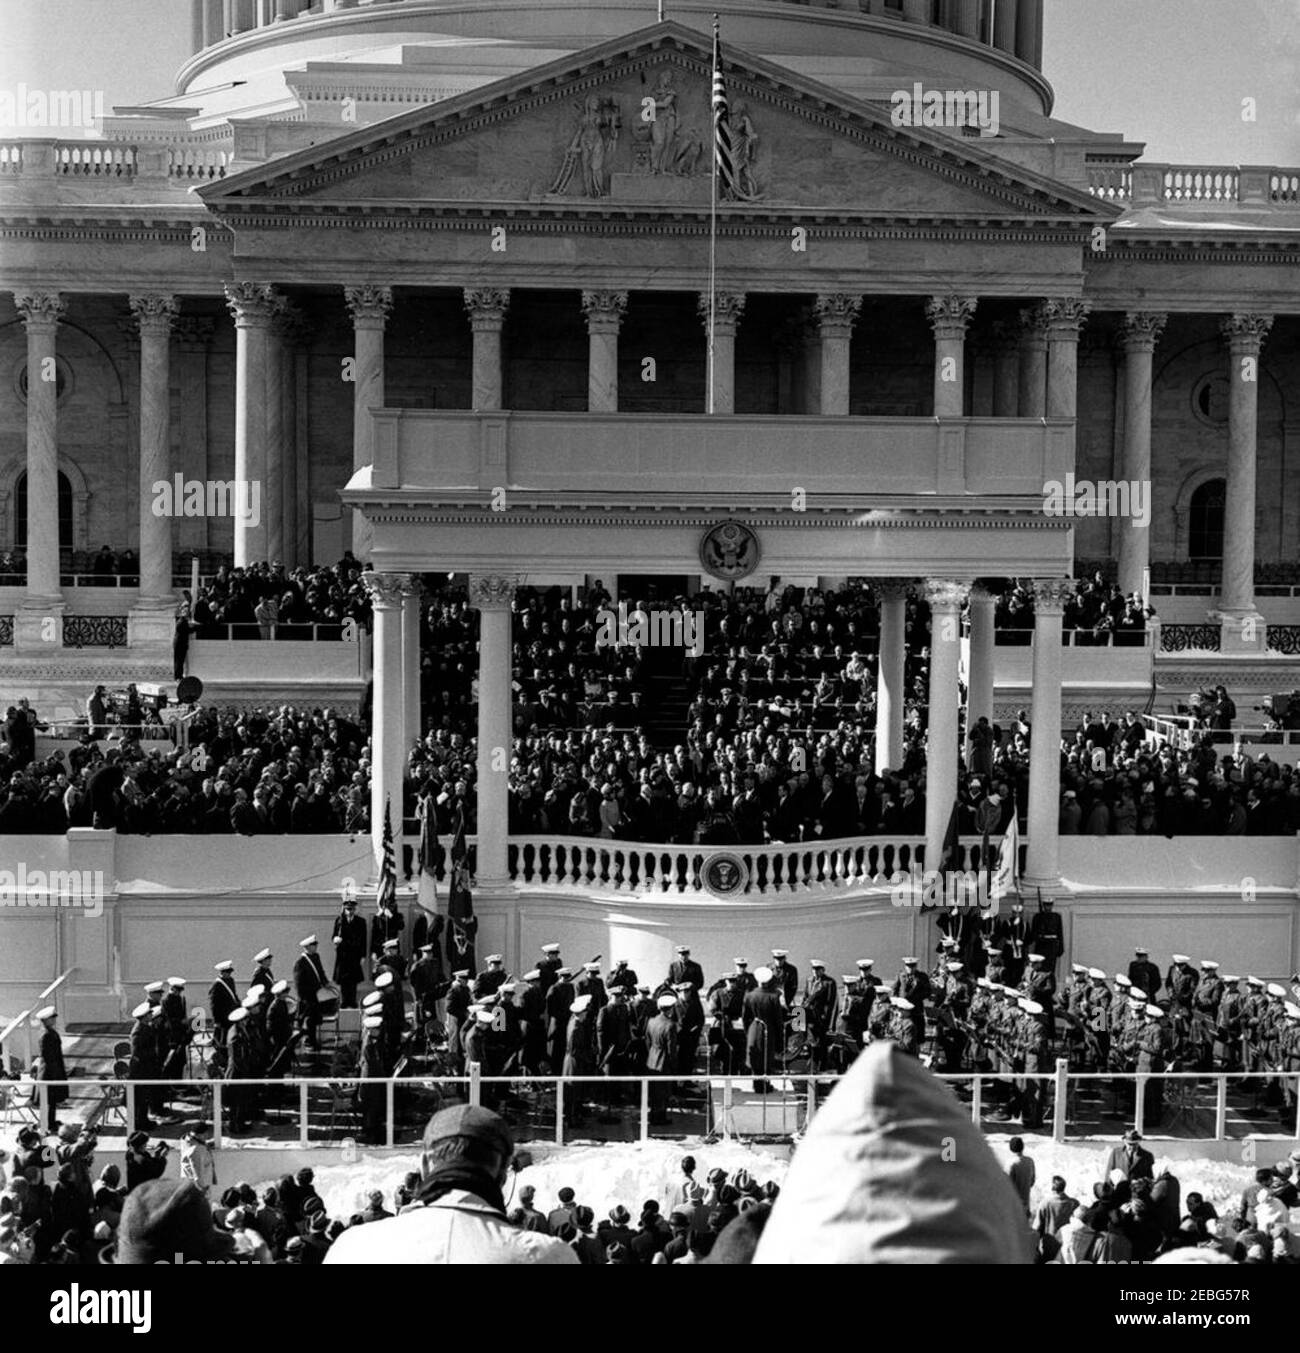 Inaugural ceremonies at U.S. Capitol, and Inaugural Parade. Inauguration of John F. Kennedy at East Portico, United States Capitol Building, Washington, D.C. Chief Justice Earl Warren administers oath of office to President-elect John F. Kennedy. Looking on: Clerk of the Supreme Court, James R. Browning (holding bible); Vice President-elect Lyndon B. Johnson; Vice President Richard M. Nixon; Former President Harry S. Truman; Former First Lady Bess Truman; President Dwight D. Eisenhower; First Lady Mamie Eisenhower; Jacqueline Kennedy; Lady Bird Johnson; Joseph P. Kennedy, Sr.; and Rose Fitzger Stock Photo